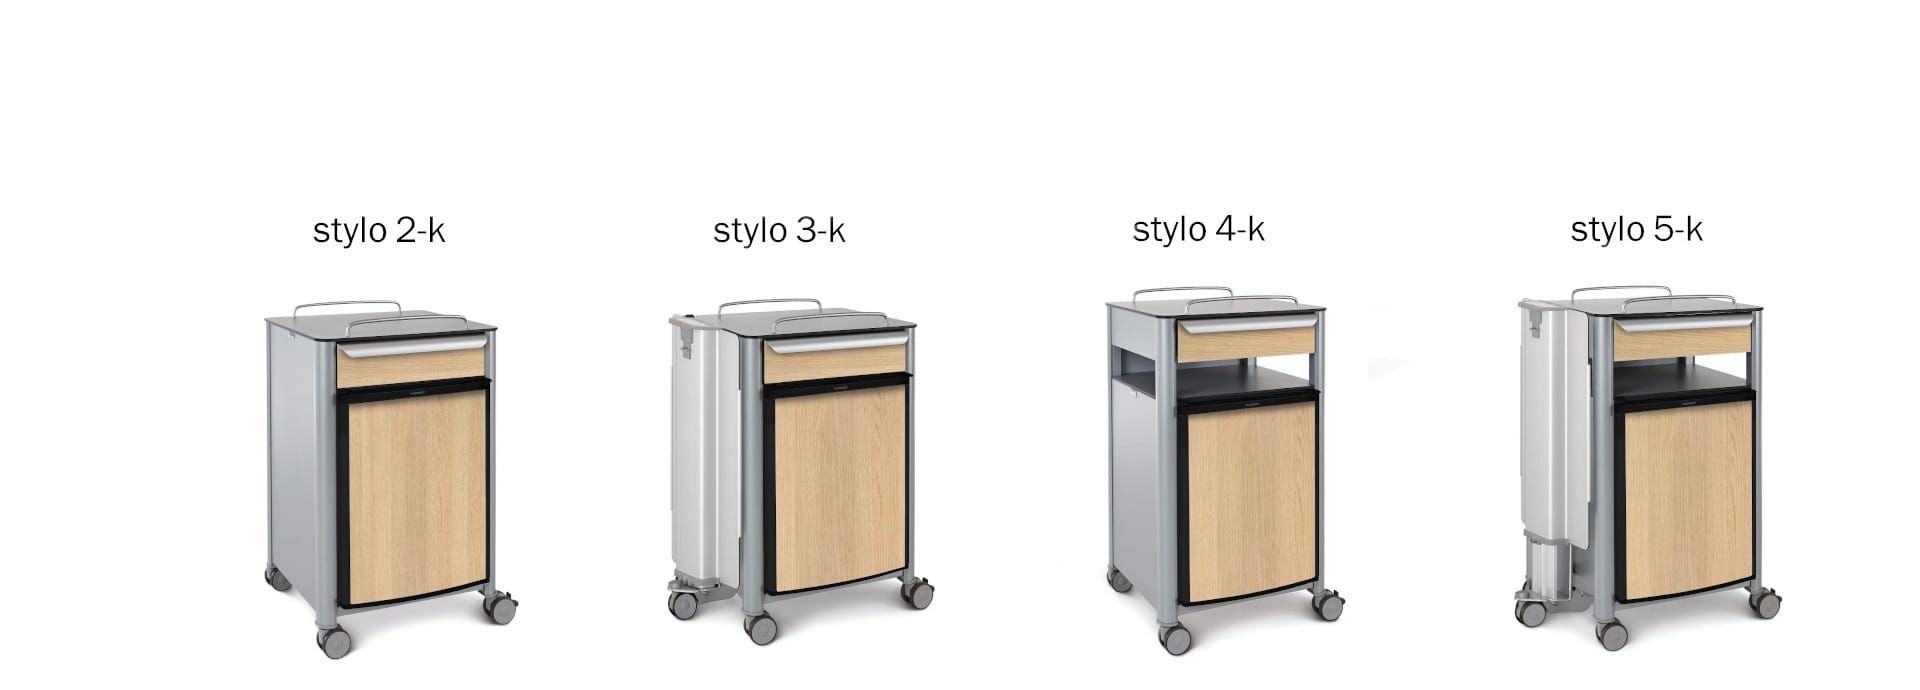 The stylo bedside cabinet series combines a cozy furniture design with innovative functions and therefore enables a range of practice-oriented product versions.